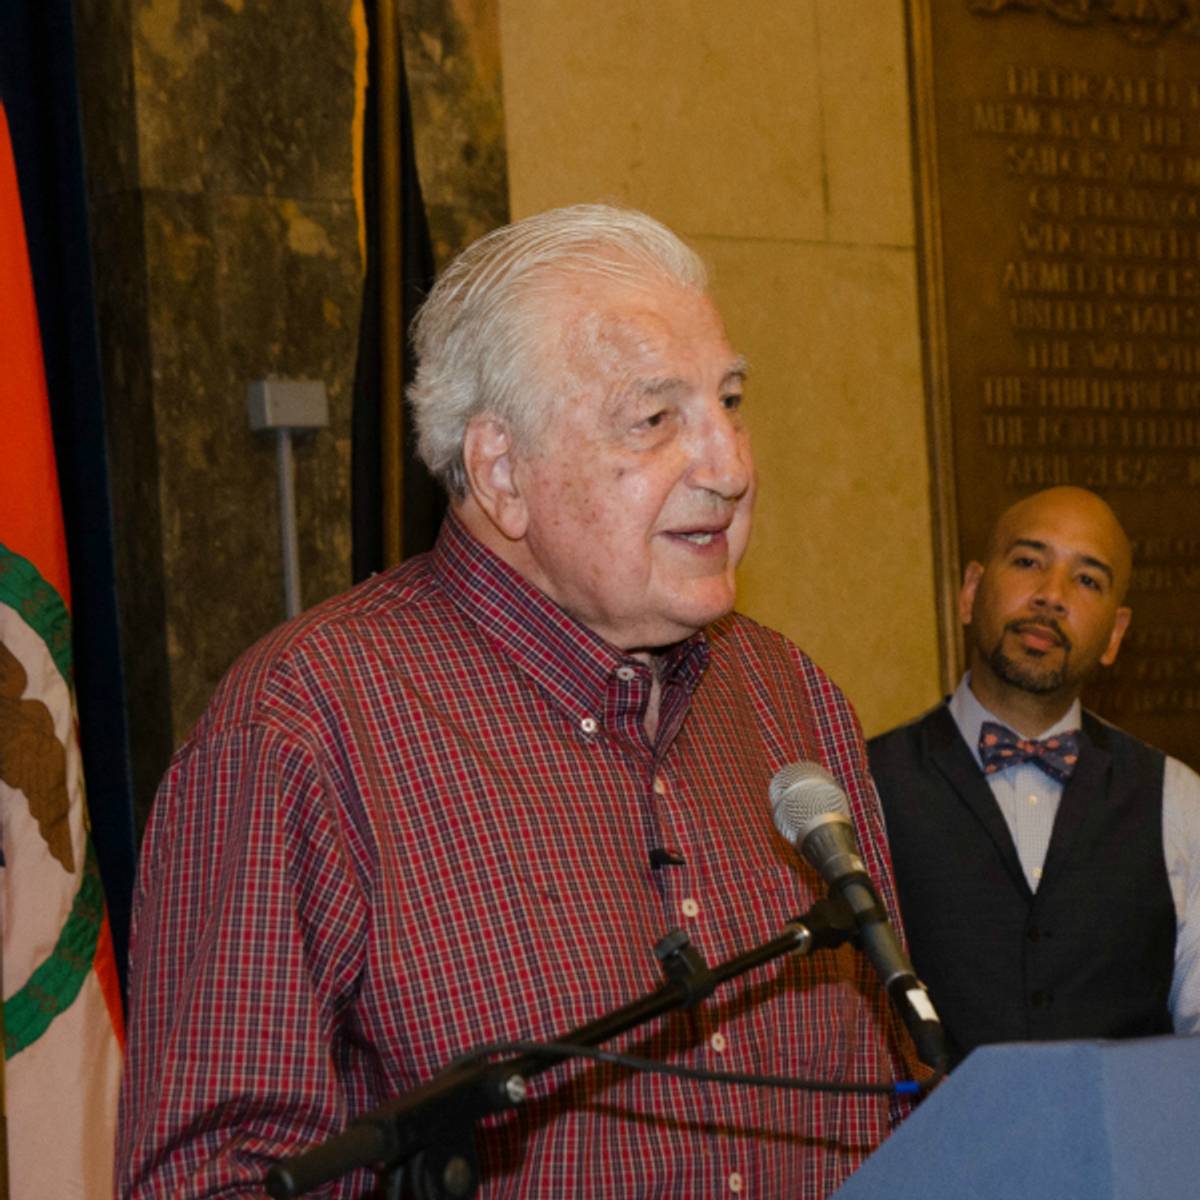 Dolph Schayes speaks during his induction to the Bronx Walk of Fame, as Bronx Borough President Ruben Diaz, Jr. looks on, May 17, 2015. (Ruben Diaz, Jr./Flickr